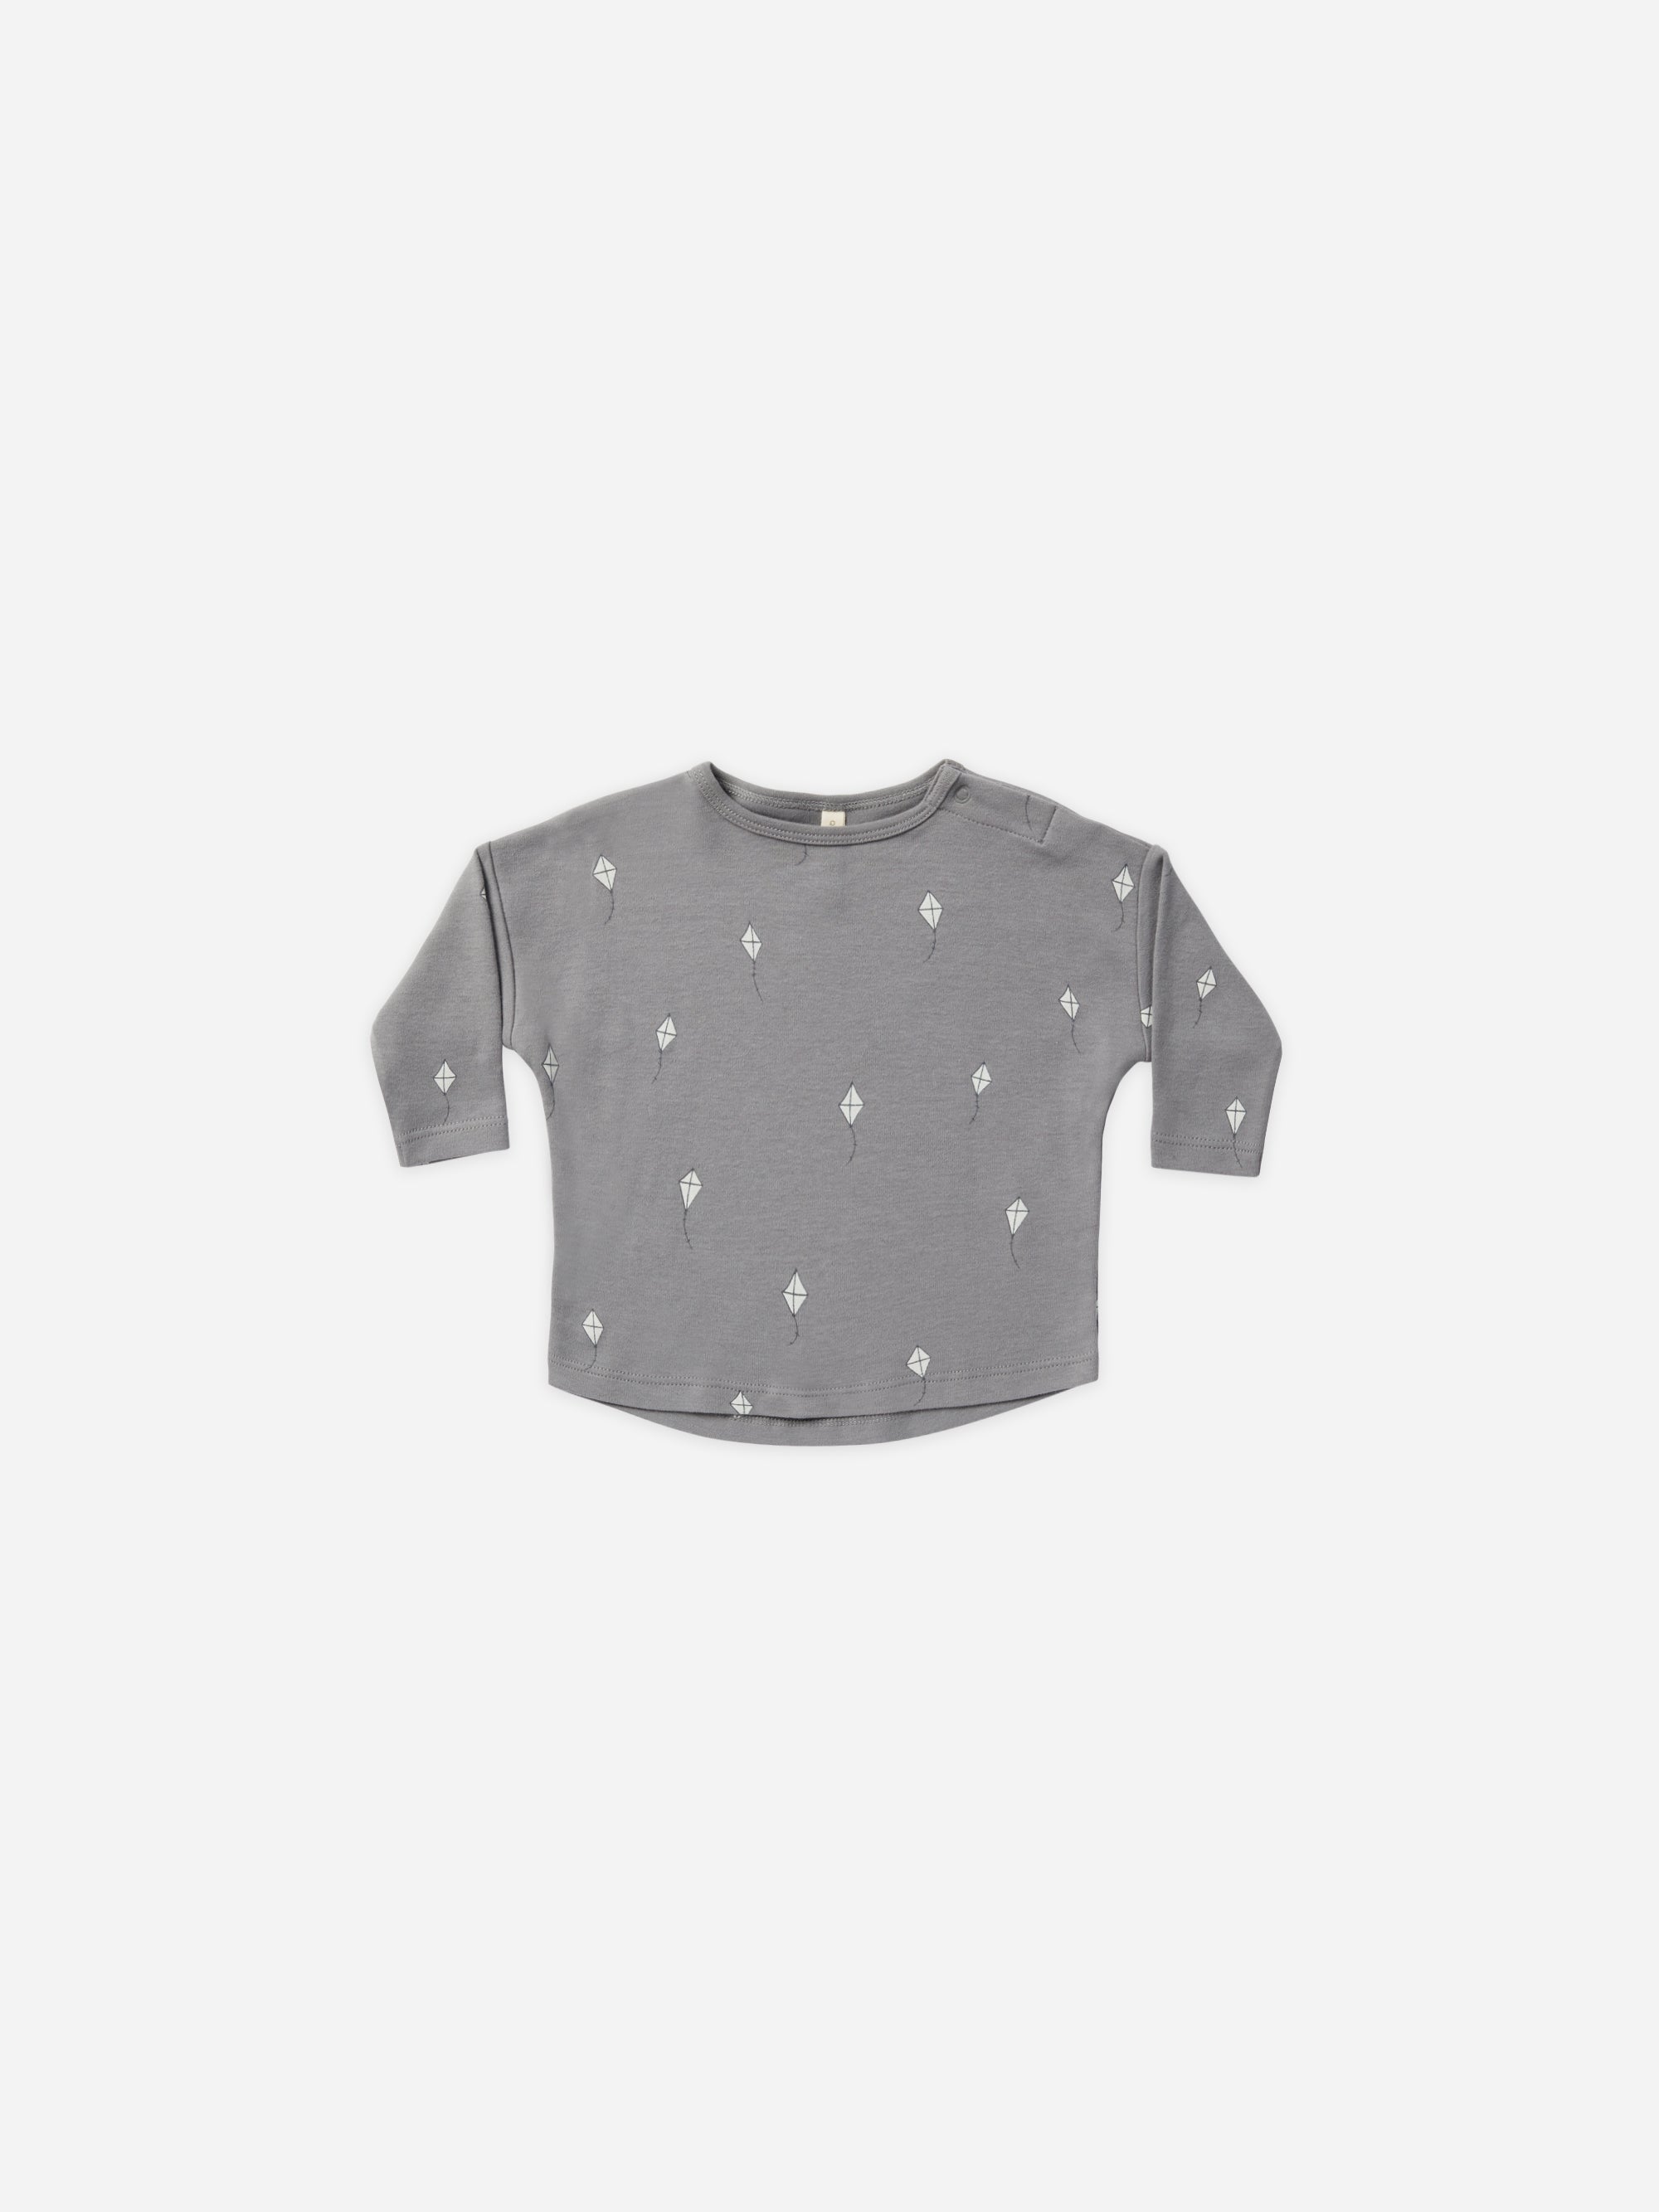 Long Sleeve Tee || Kites - Rylee + Cru | Kids Clothes | Trendy Baby Clothes | Modern Infant Outfits |